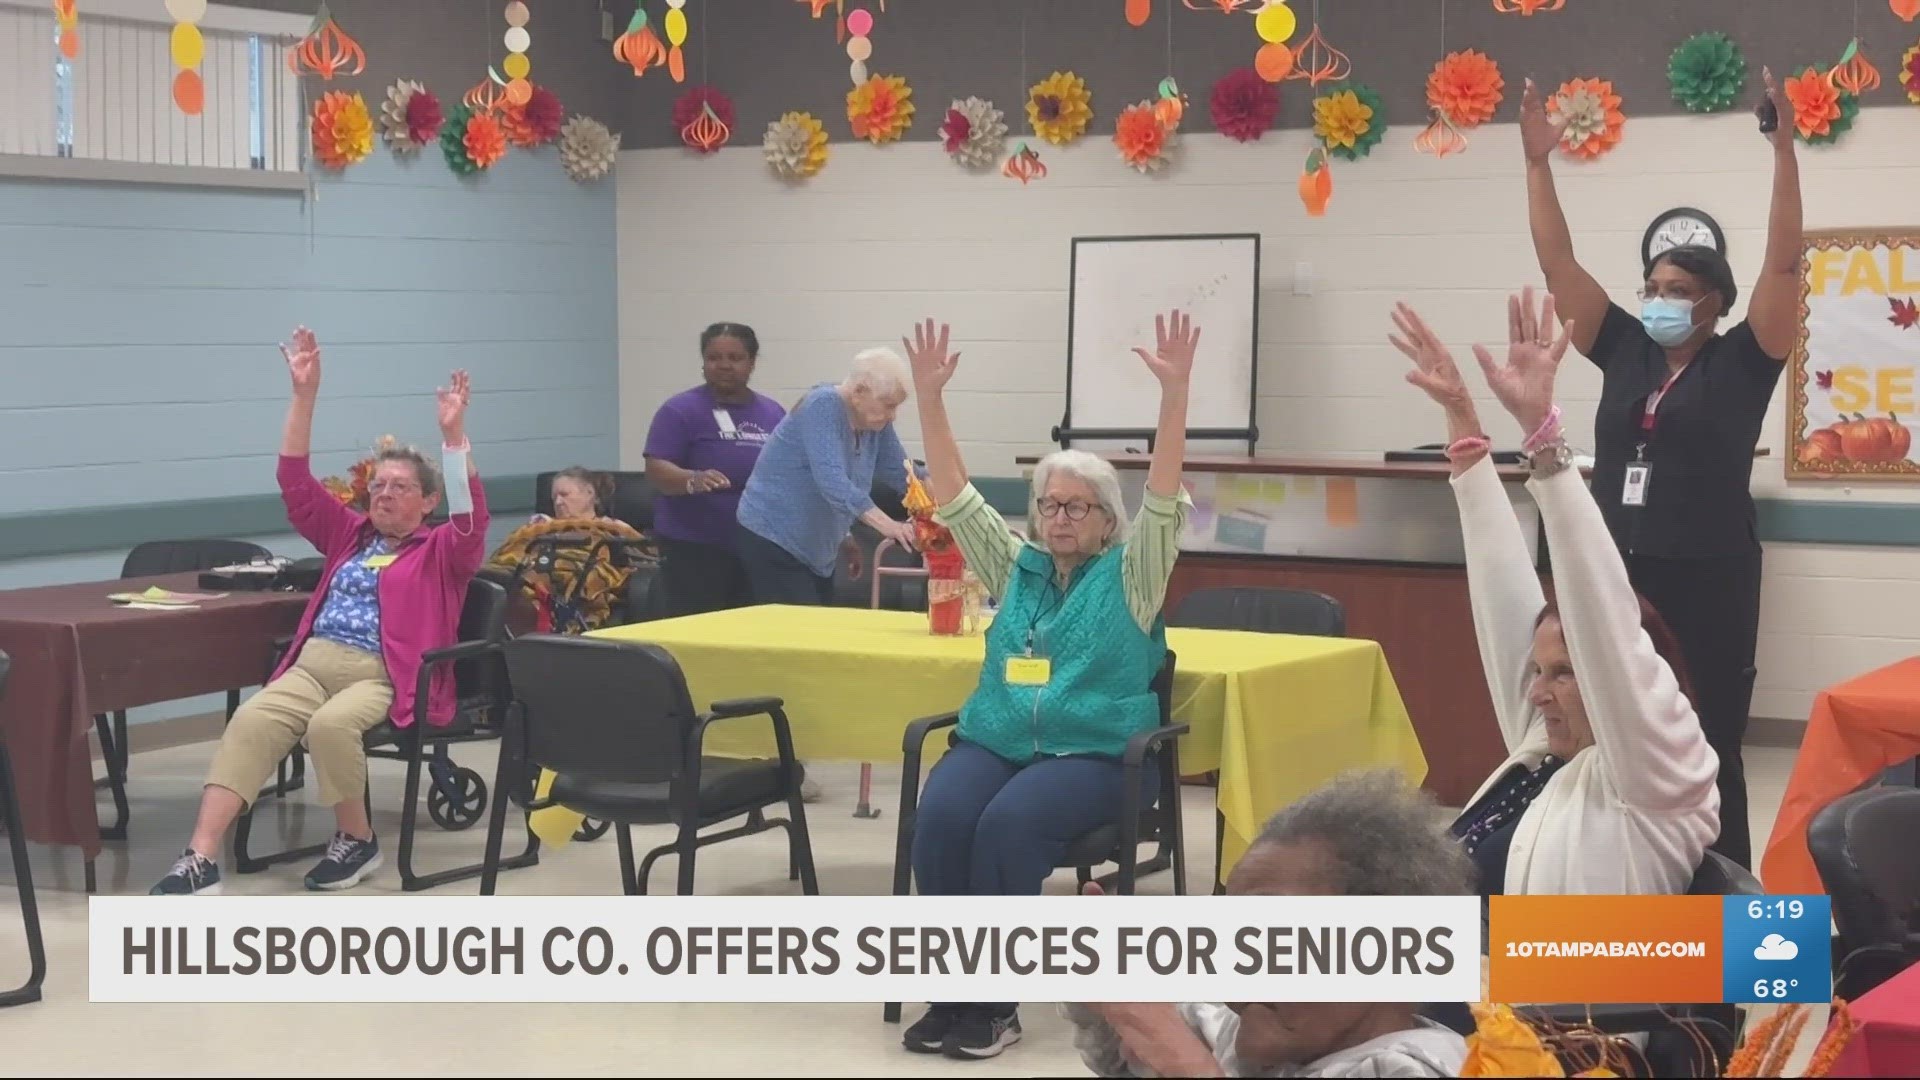 They offer weekly activities and services for seniors as an alternative to assisted living. Jenny Dean gives us a closer look.